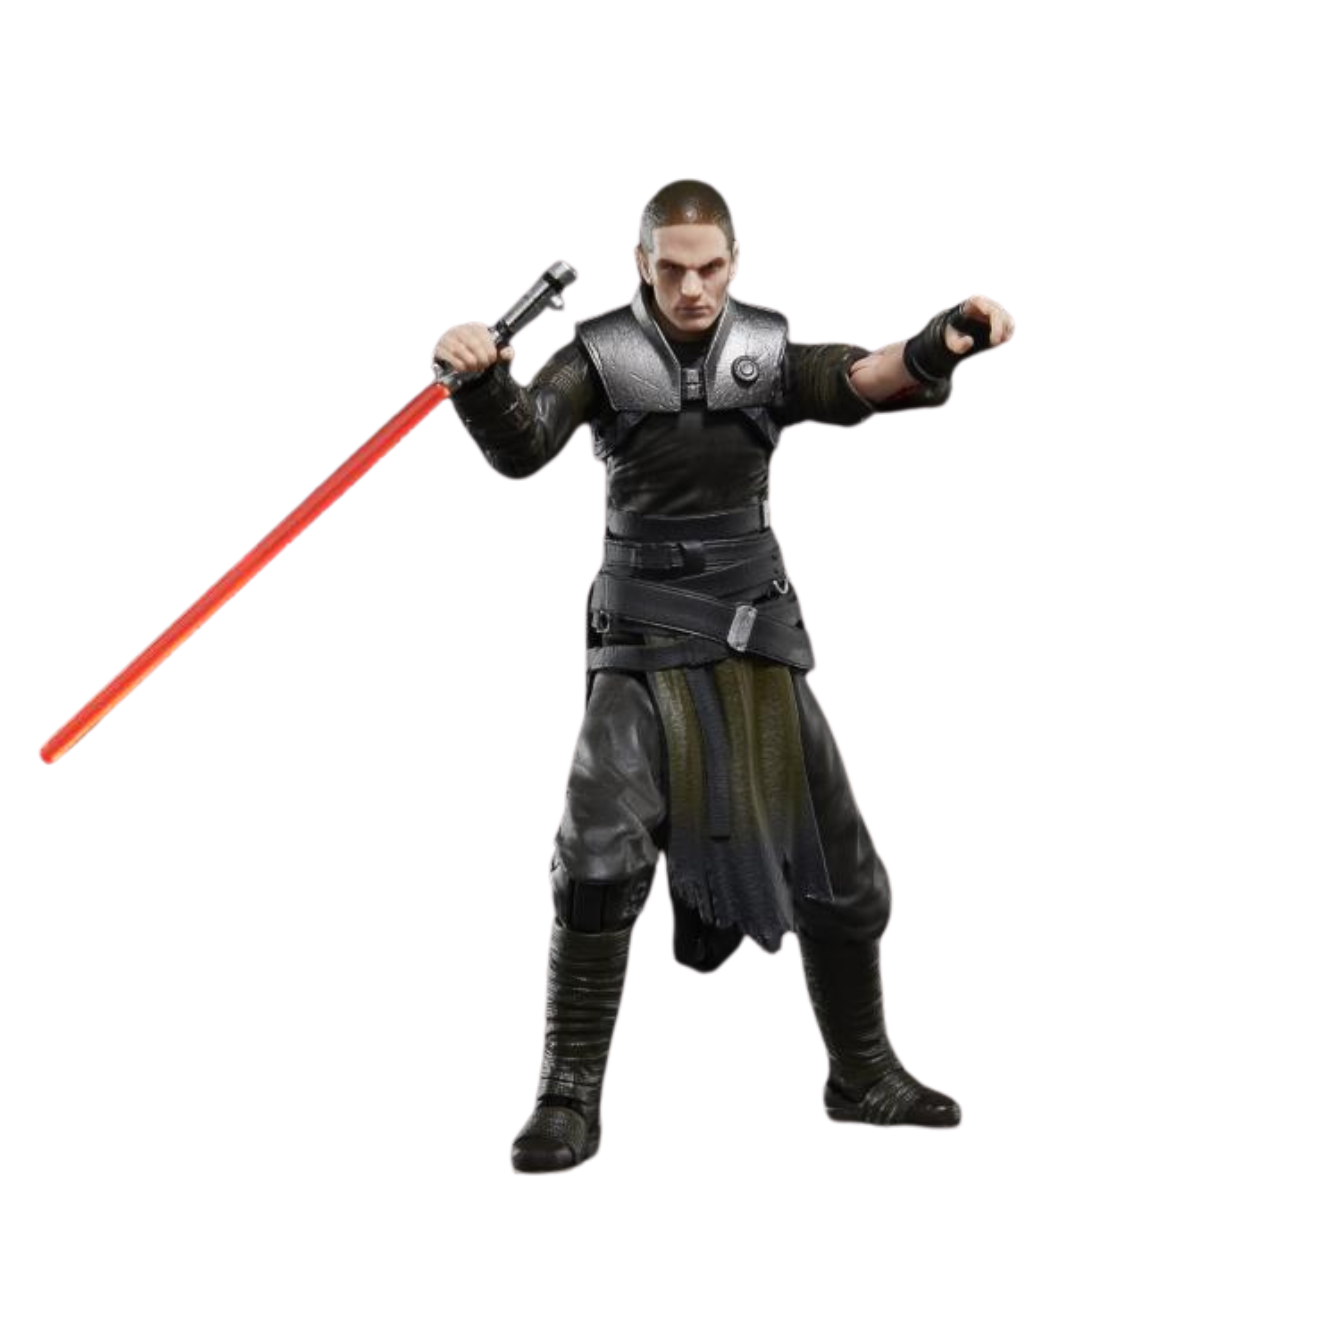 Star Wars: The Black Series Gaming Greats 6" Starkiller (The Force Unleashed)